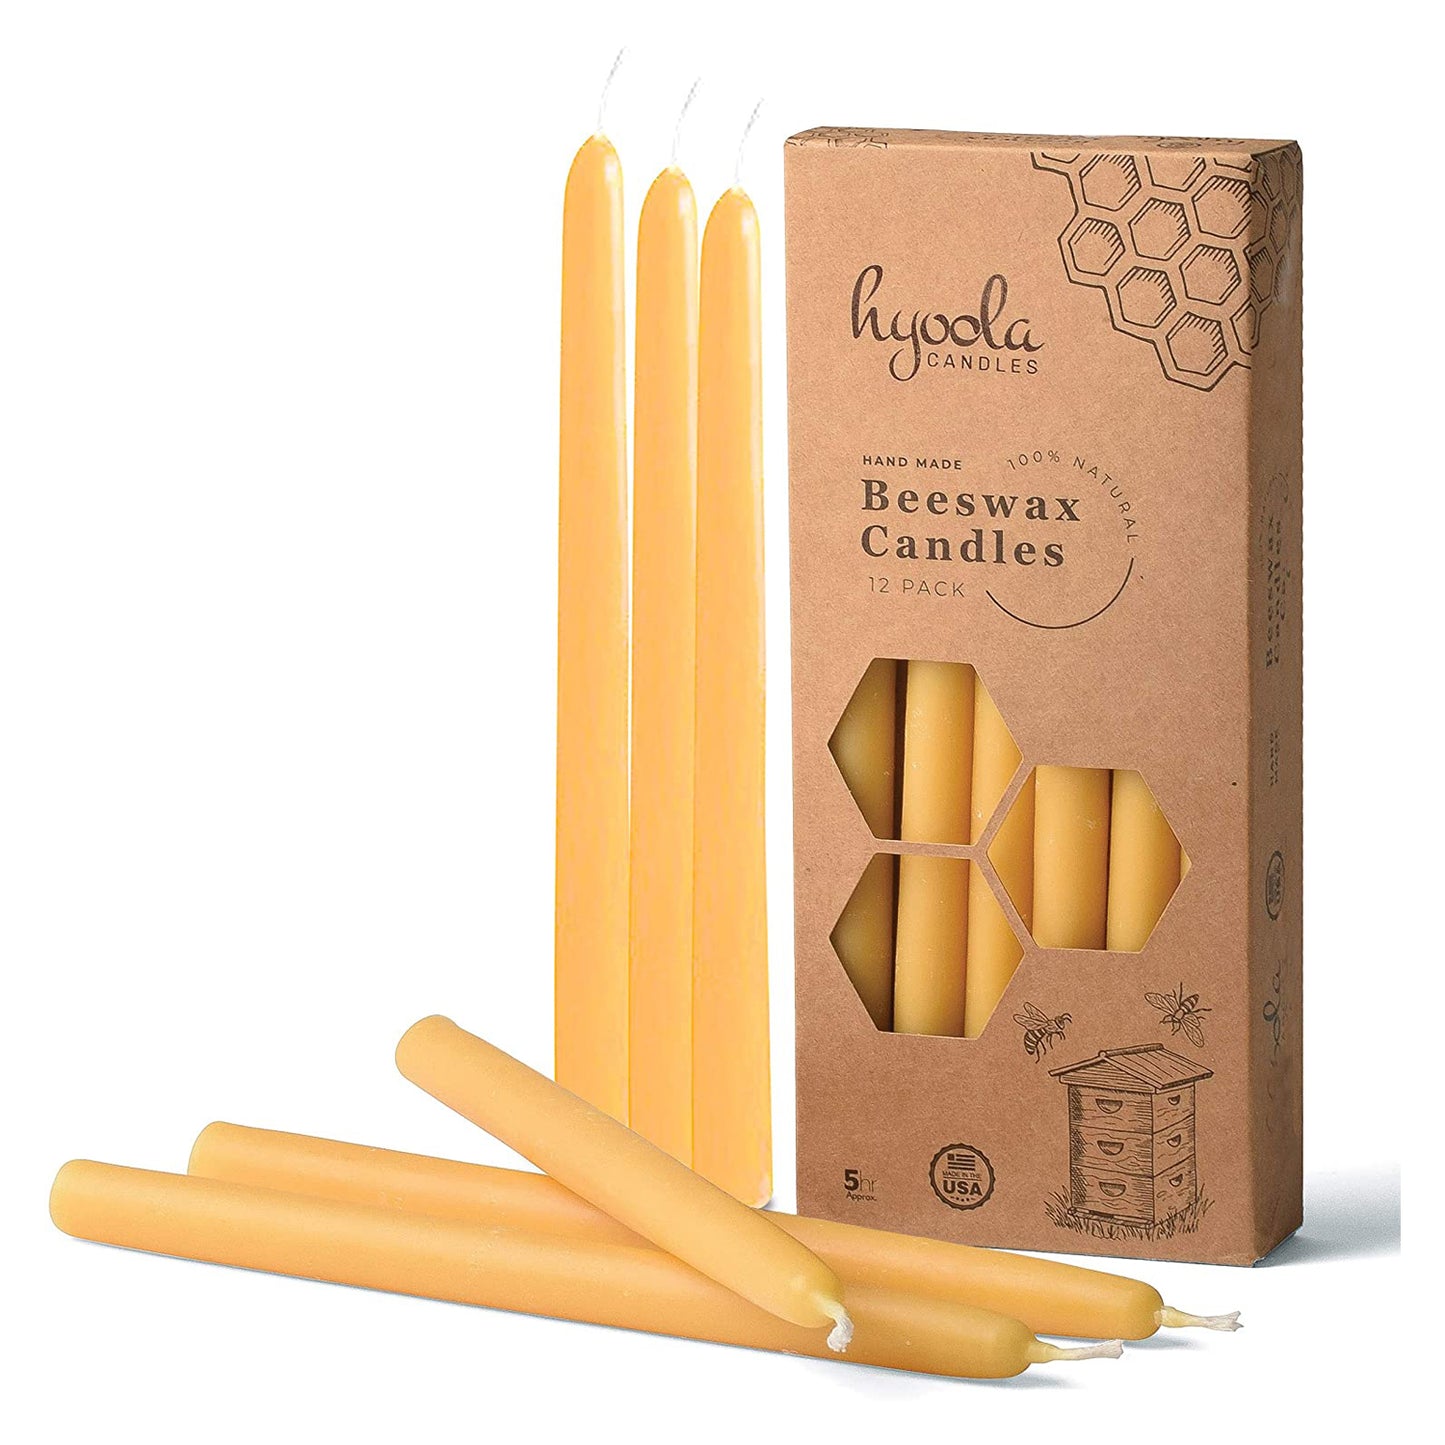 Handmade Beeswax Taper Candles